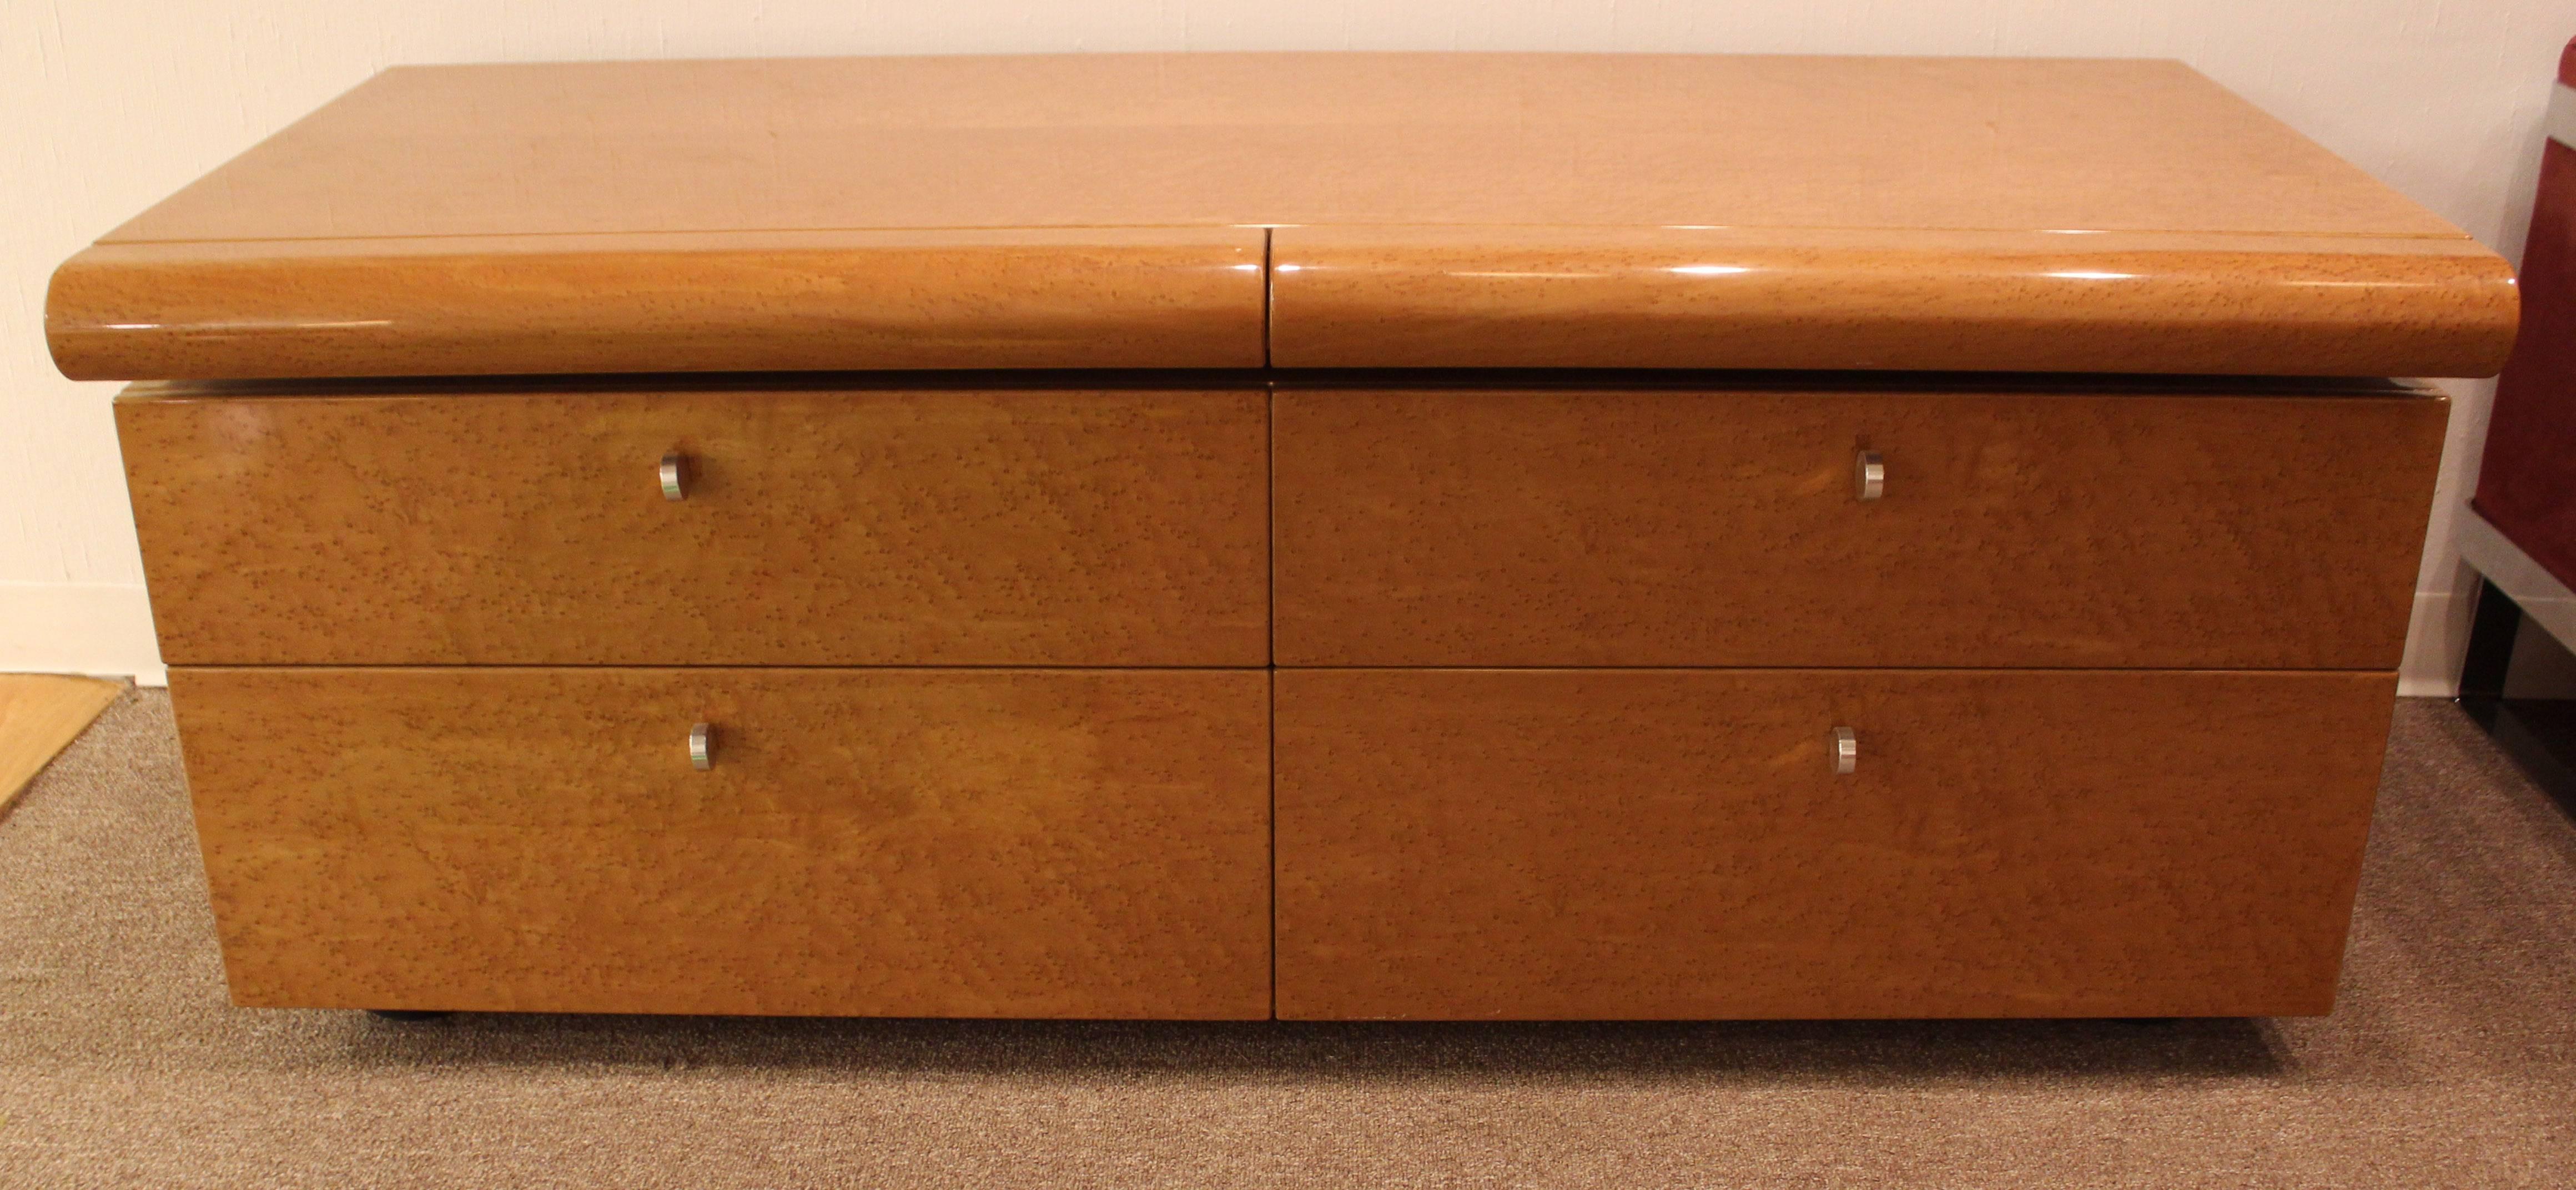 Amazing signed pair of Saporiti Italia dressers dating to the 1980s. Signed with original label.